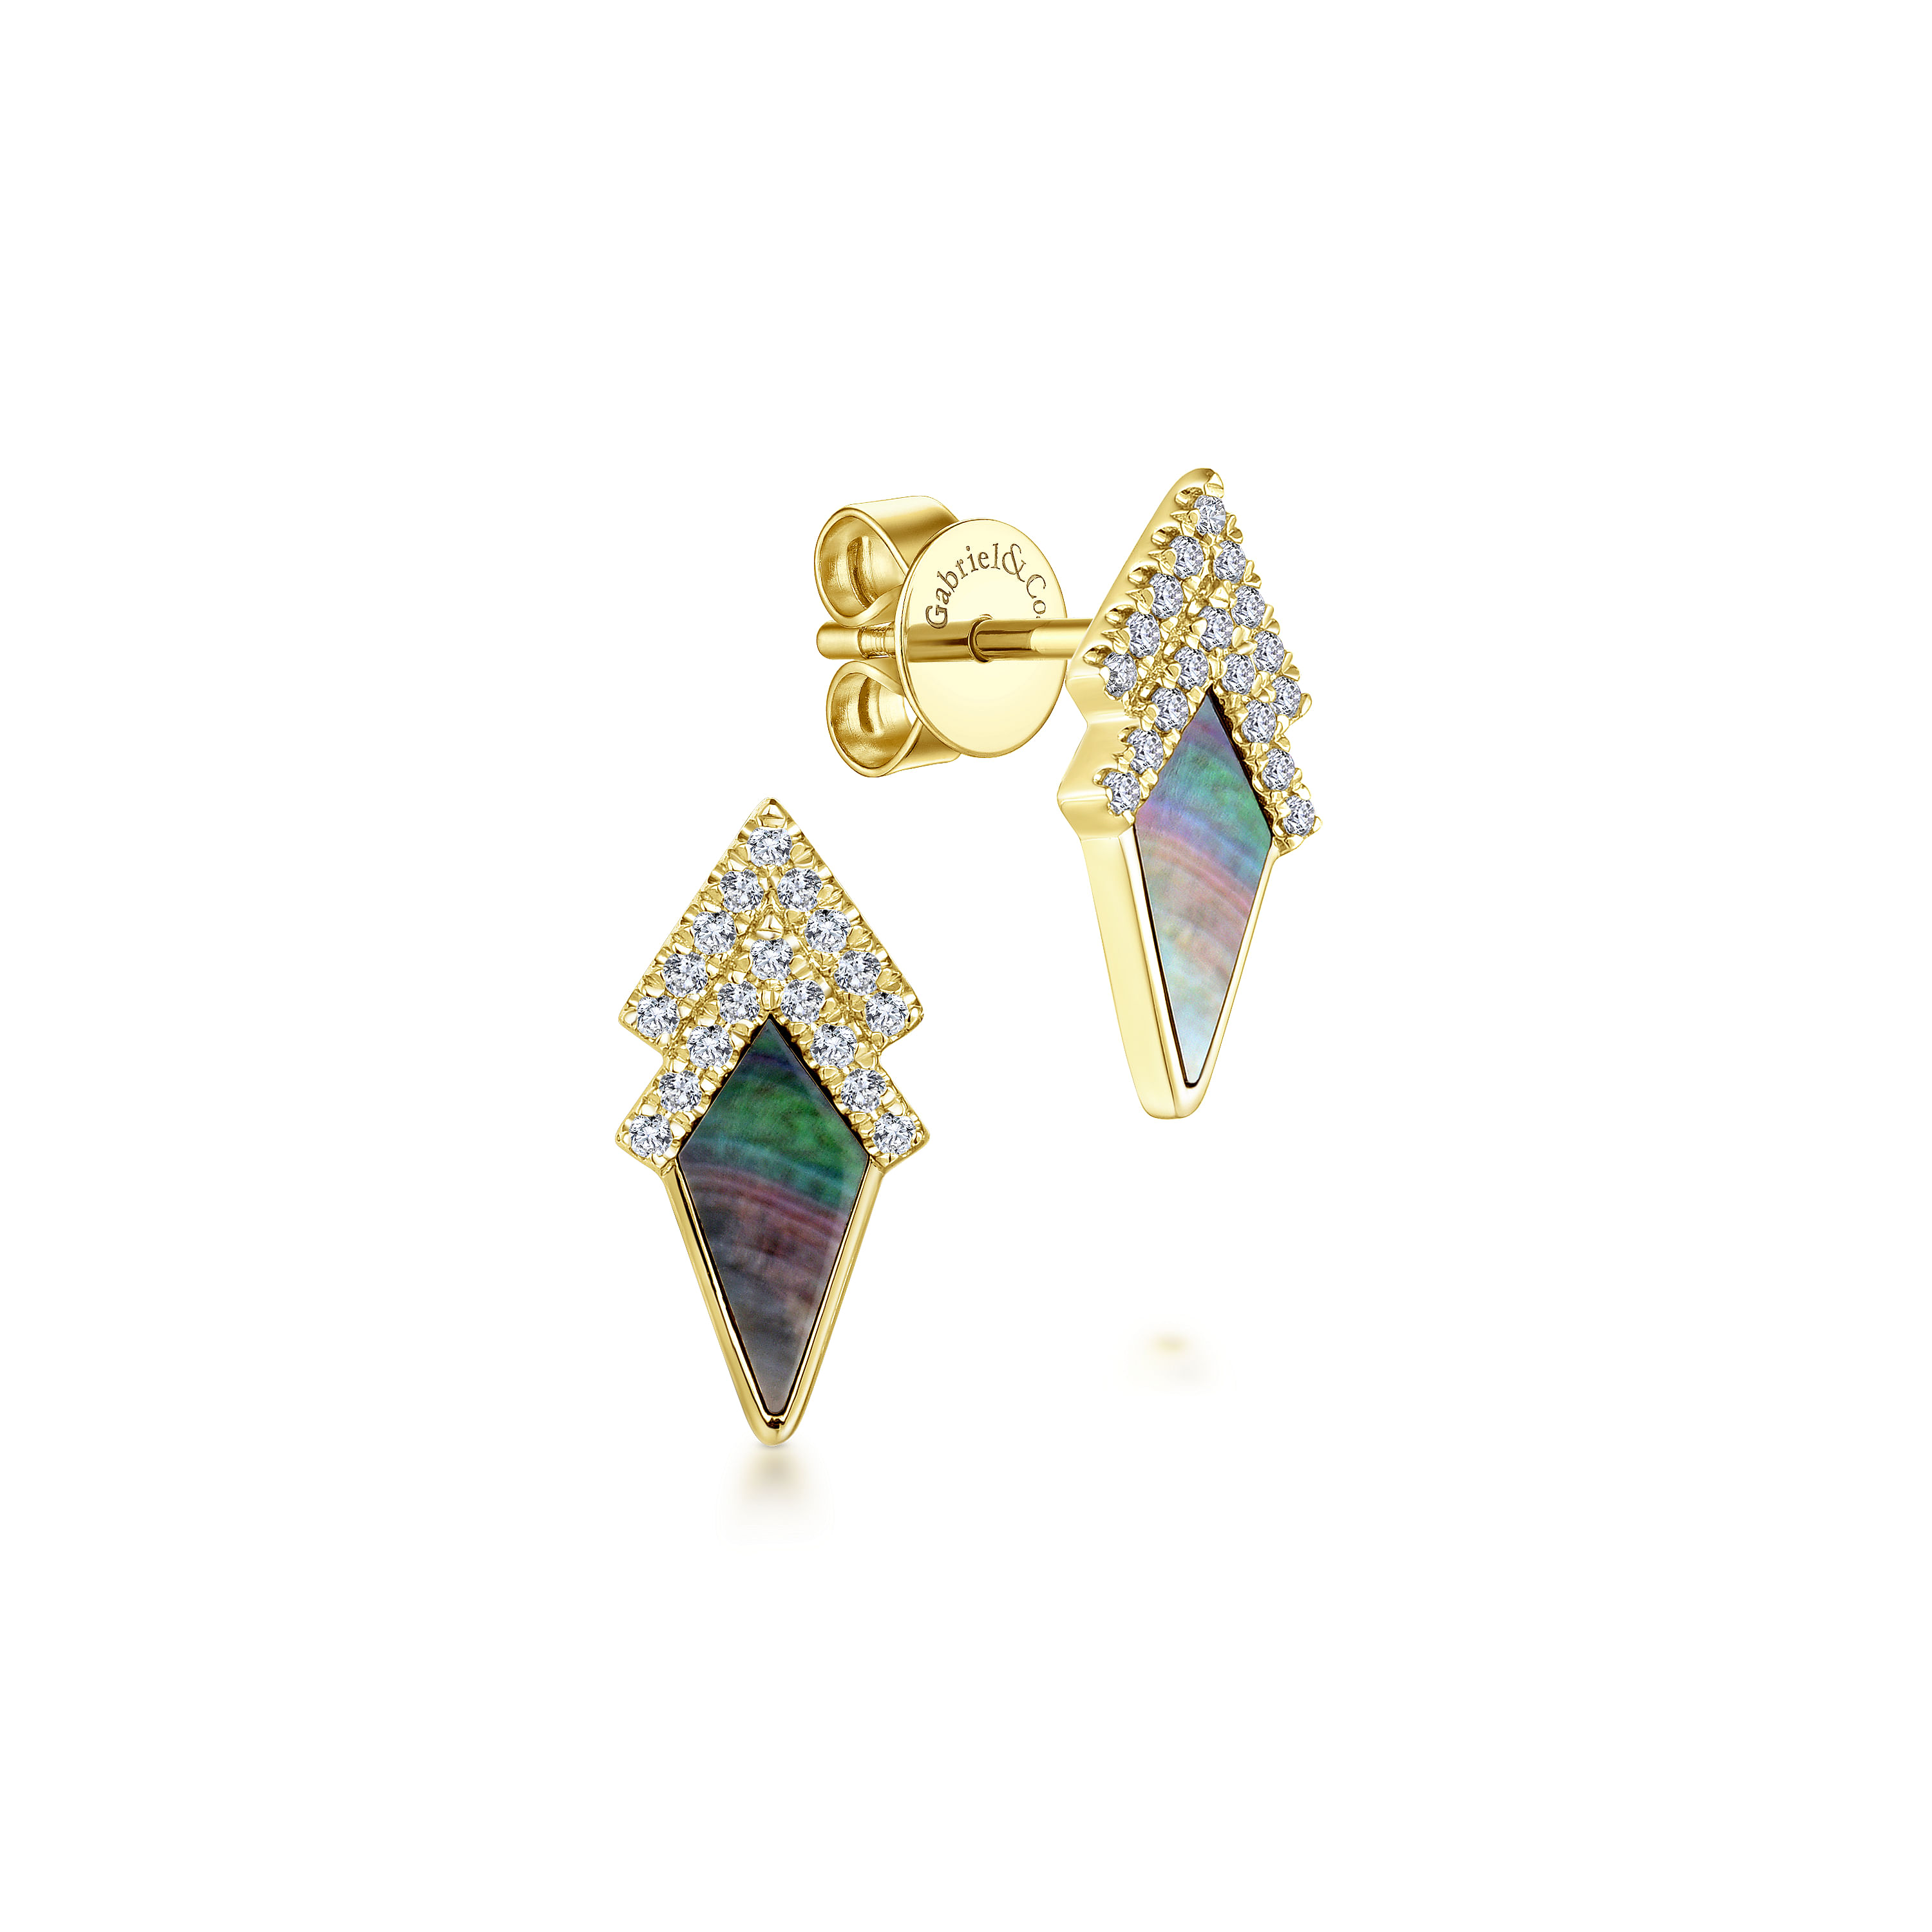 14K Yellow Gold Kite Shaped Black Mother of Pearl Earrings with Chevron Shaped Diamond Tops